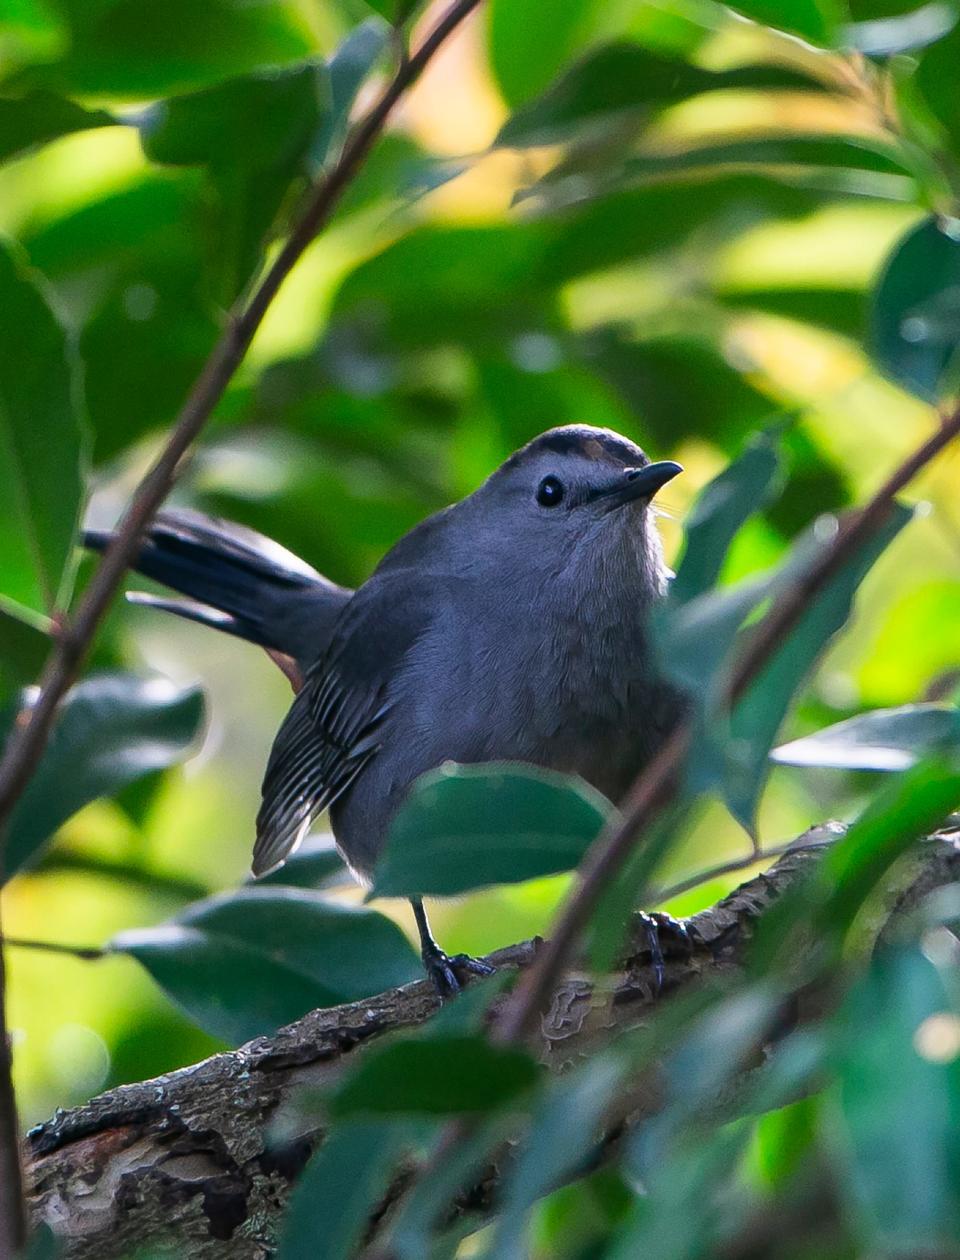 The gray catbird, a relative of the mockingbird, is known to mimic the calls of other birds.